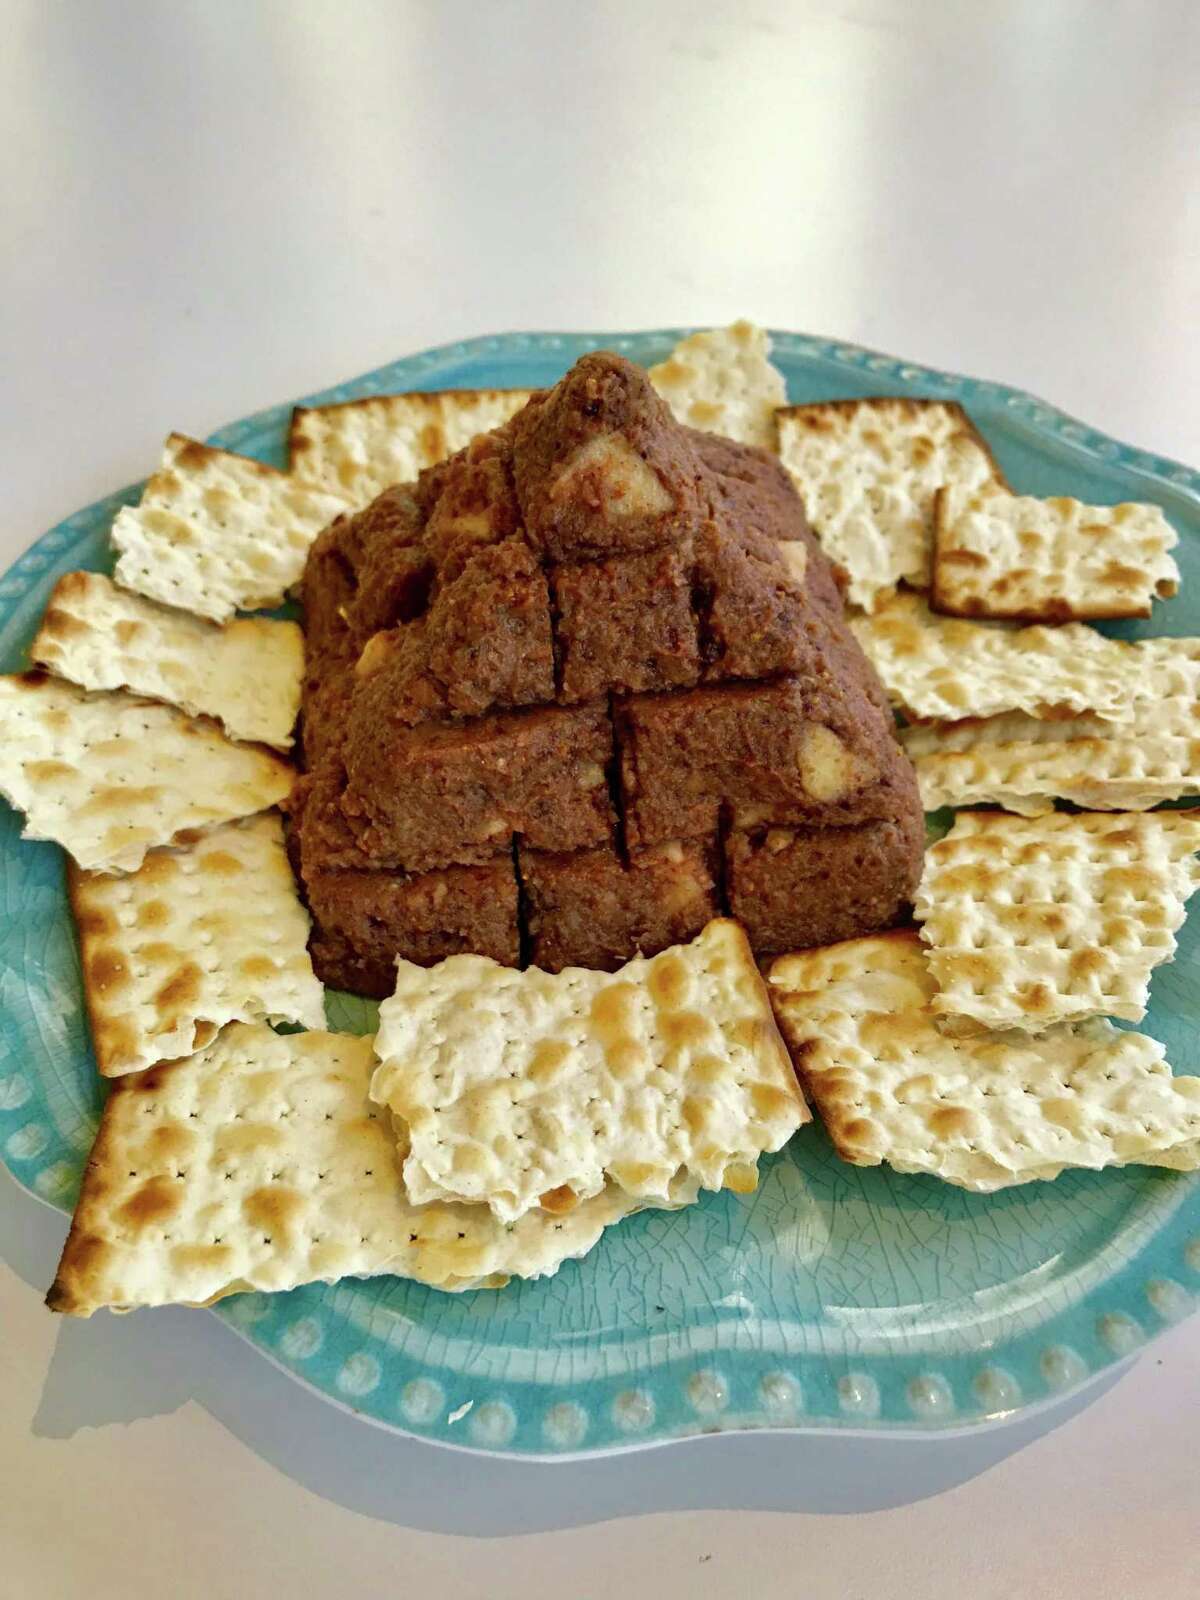 How to make a delicious, pyramid-shaped charoset for Passover Seder